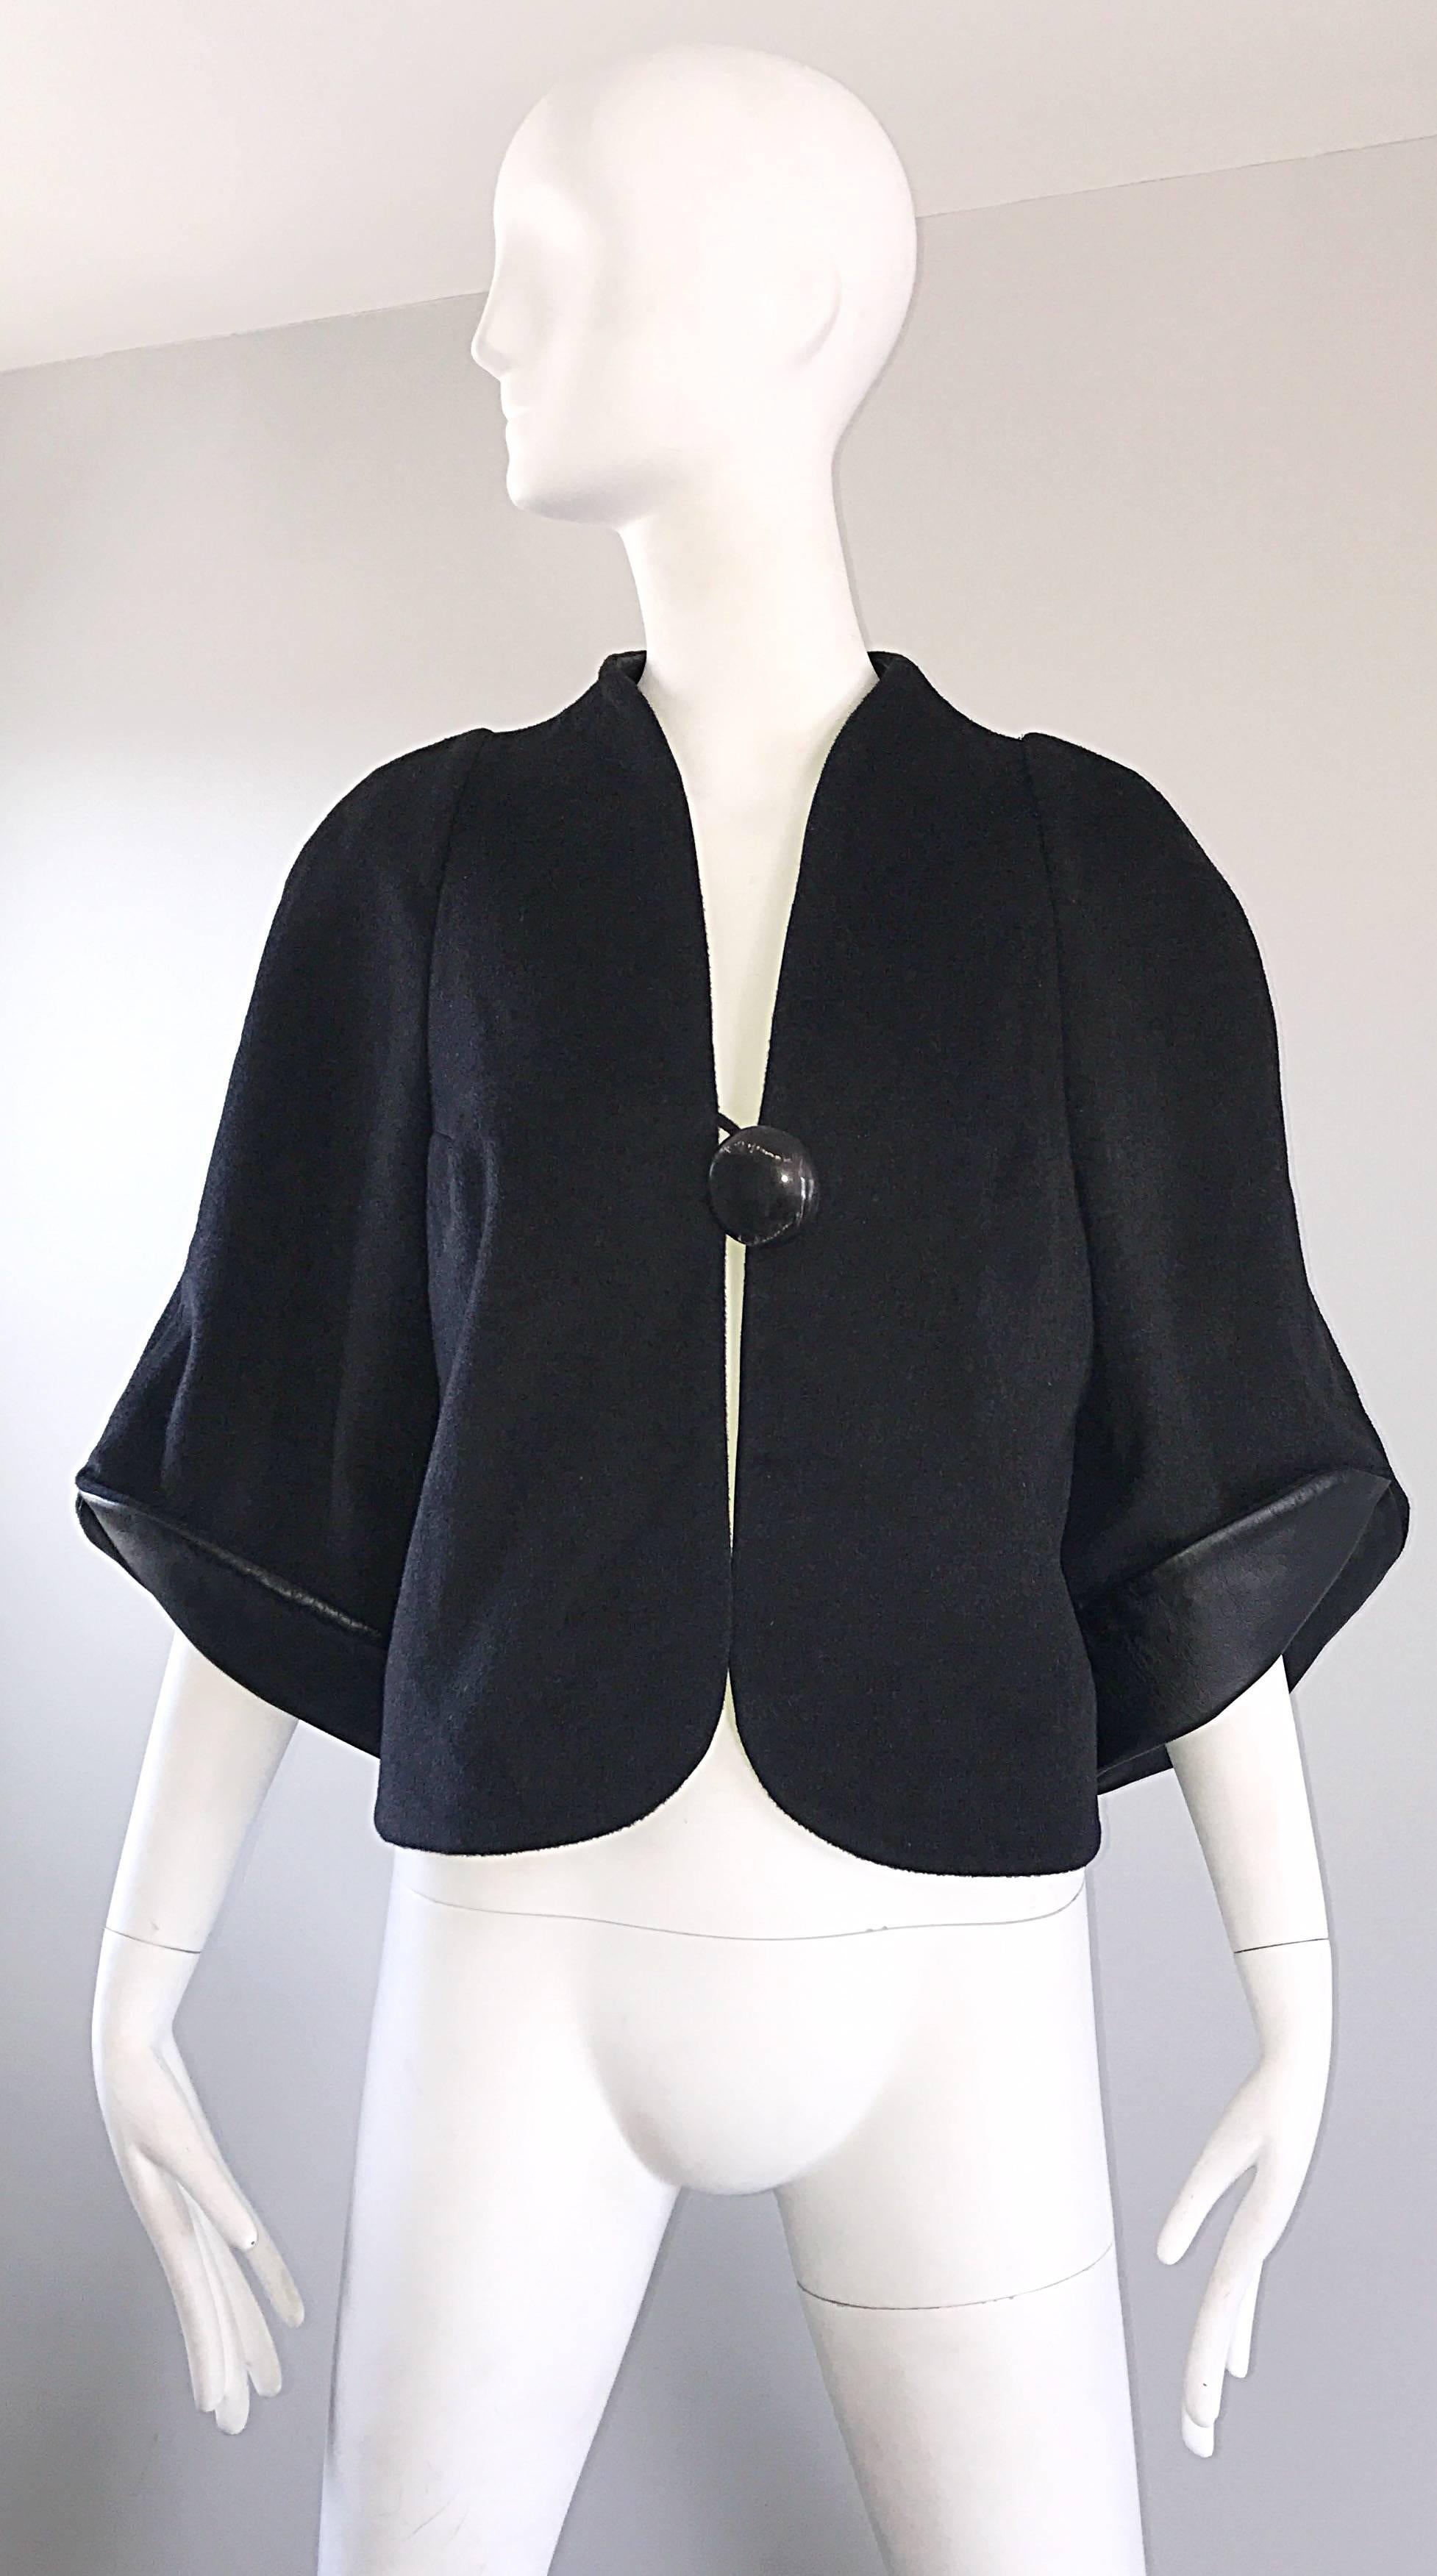 Spectacular brand new RUBIN SINGER black cashmere, wool, and leather cropped swing jacket! Features a singular oversized black marbleized button below the bust. Wide bell sleeves, with soft black lambskin leather under the sleeve cuffs that can be